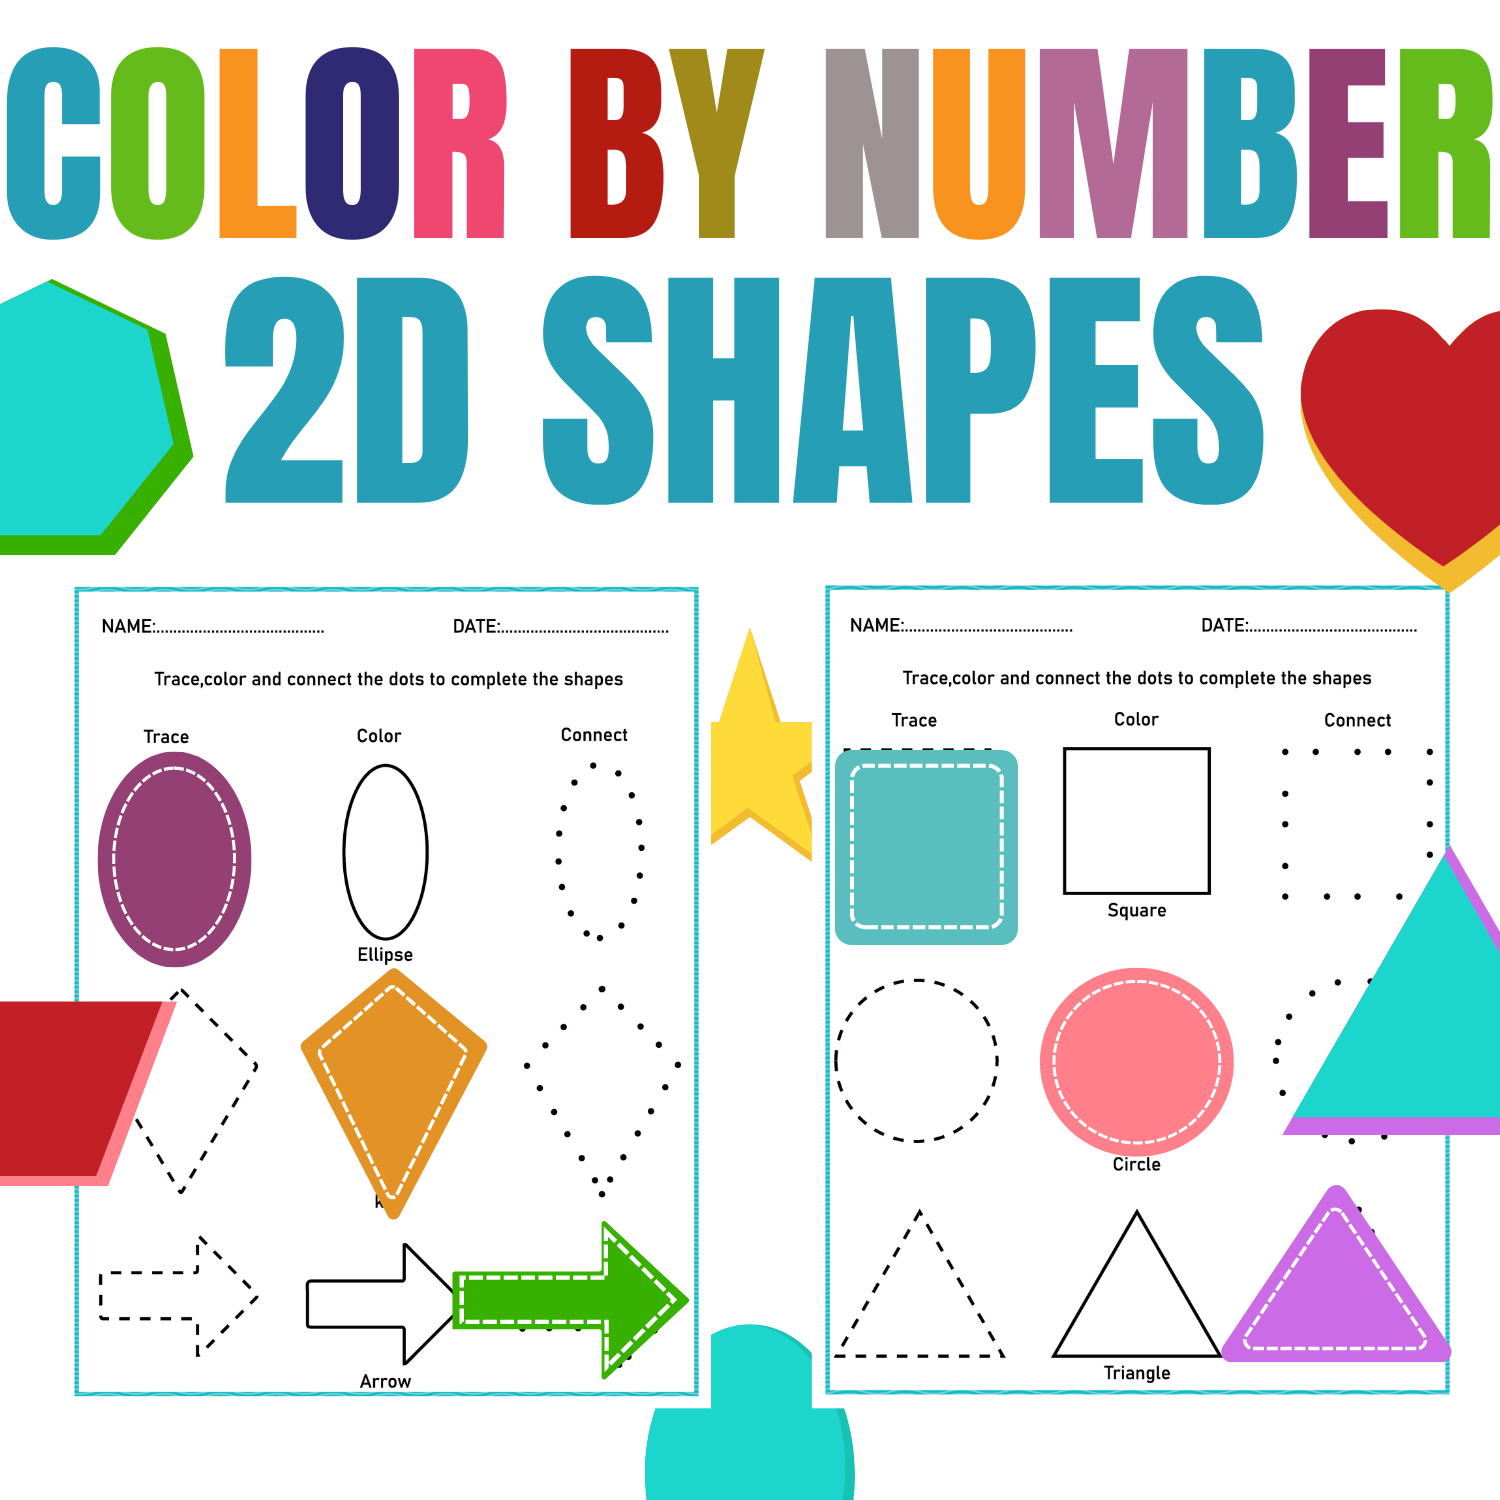 Geometric shapes coloring book shapes tracing drawing and coloring d shapes made by teachers